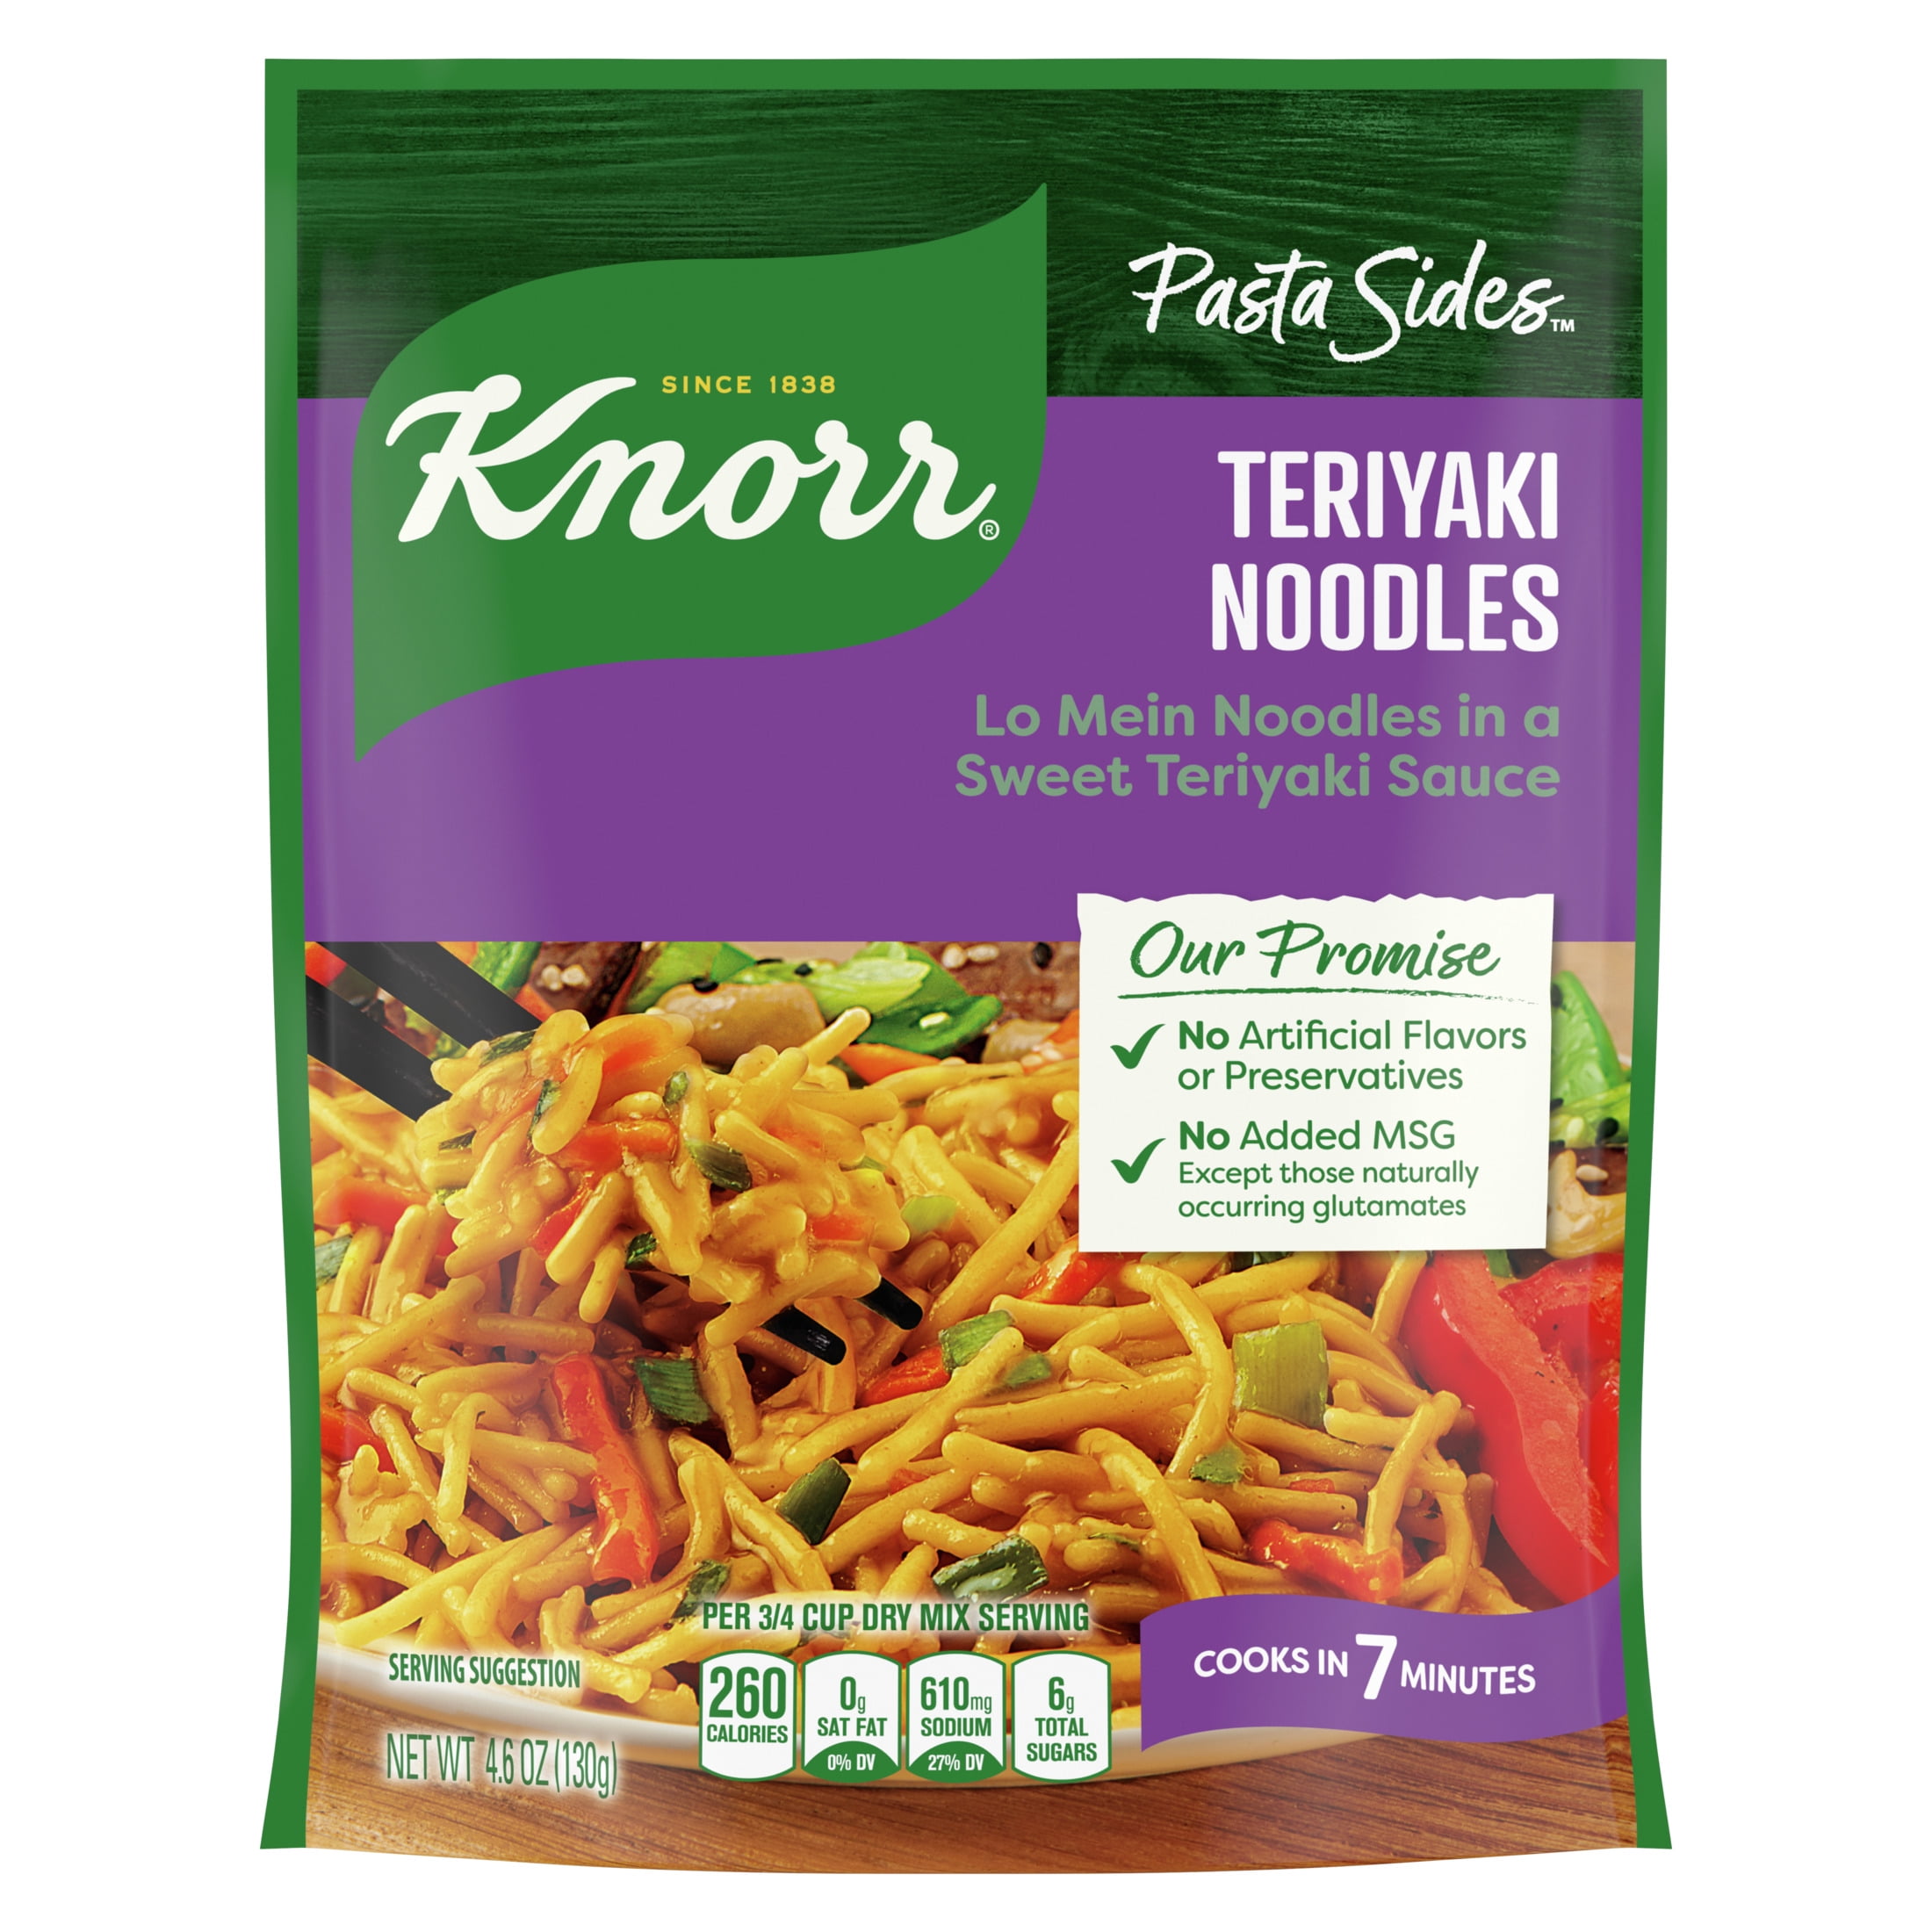 Knorr Pasta Sides Teriyaki Noodles, Cooks in 7 Minutes, No Artificial Flavors, No Preservatives, No Added MSG 4.6 oz